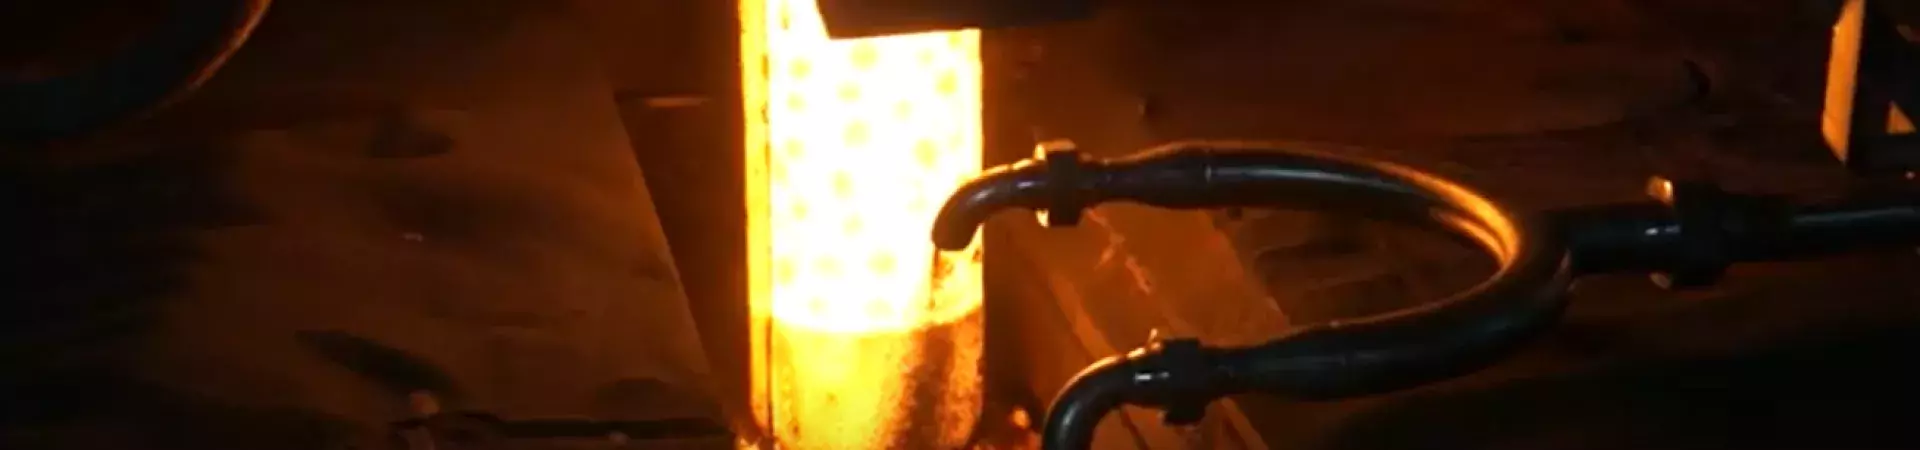 Steel casting fluxes being introduced into the mold